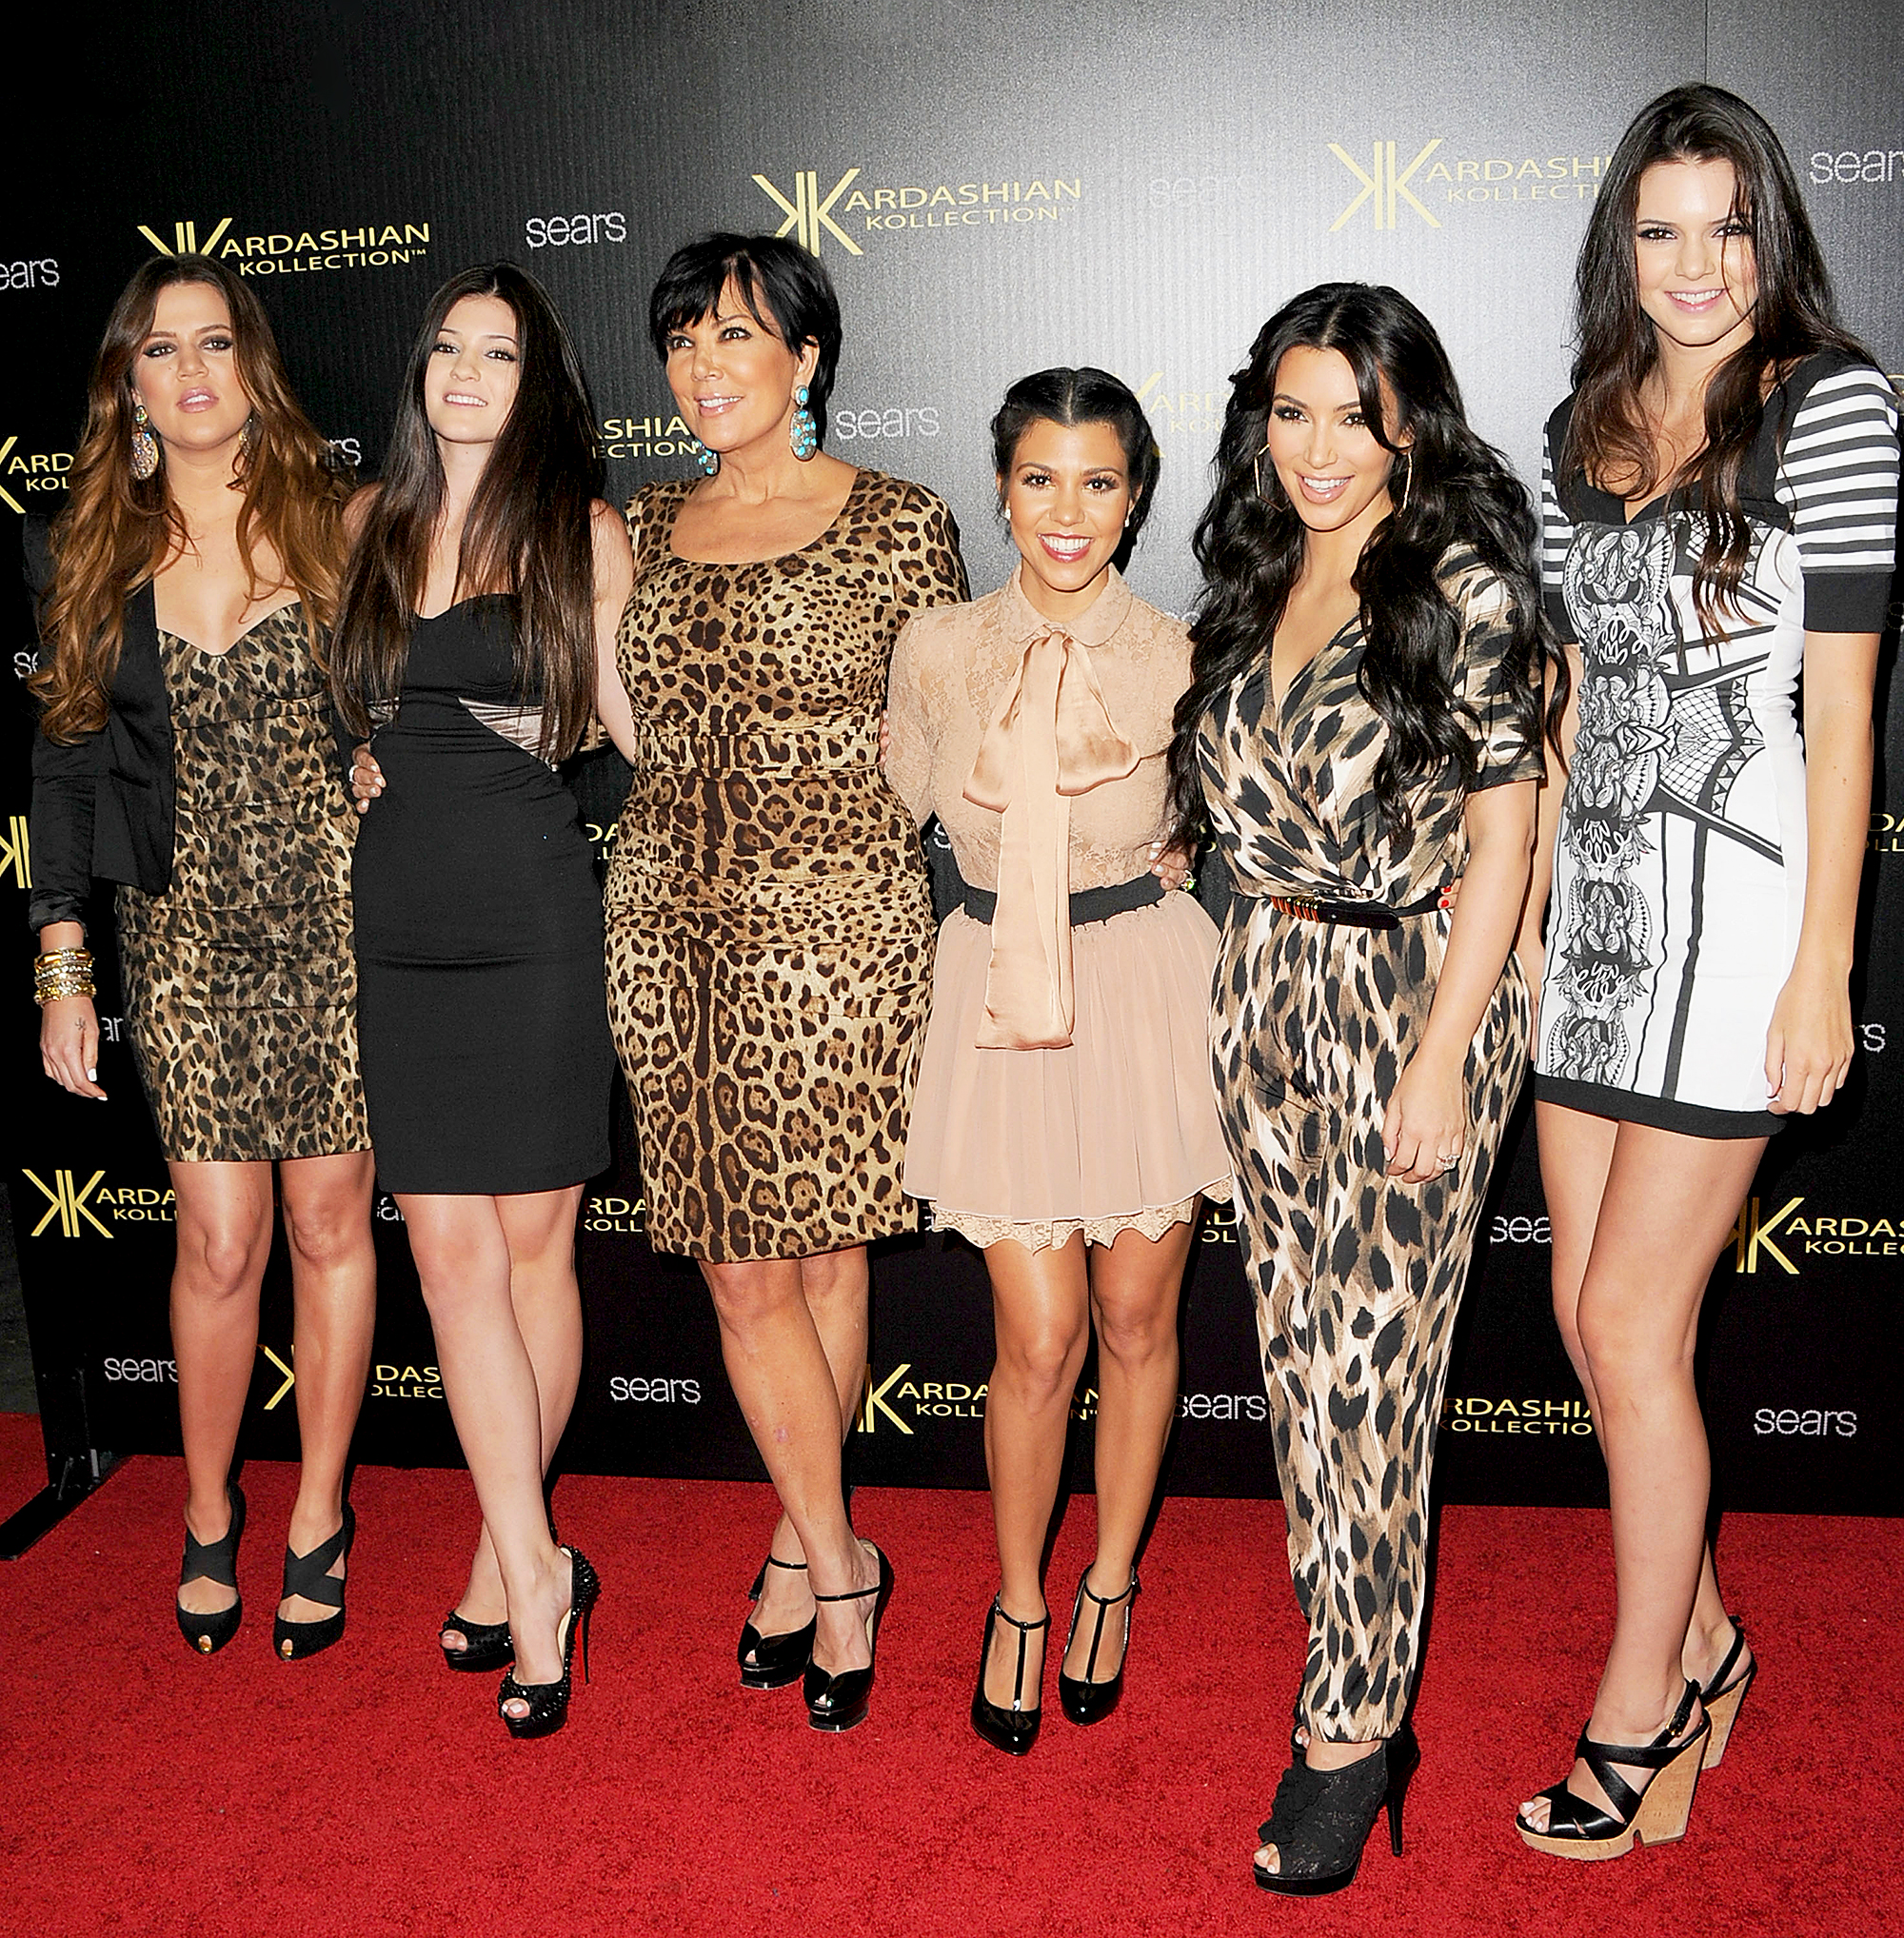 Kardashian-Jenner Family's Biggest Controversies and Scandals